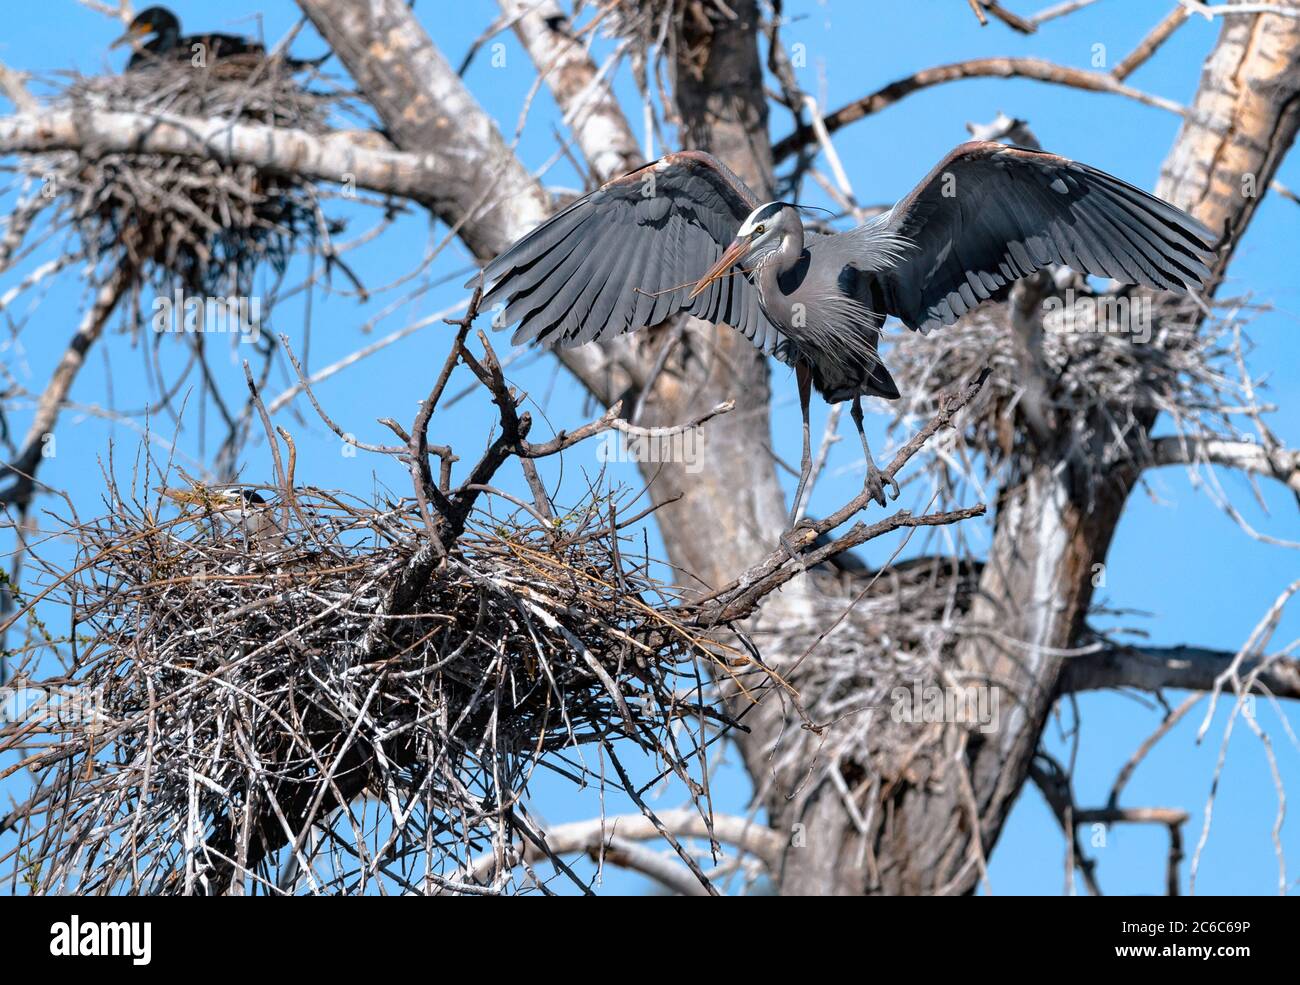 A Great Blue Heron stands on a branch with open wings and a stick in his bill, while the female, nestled in the nest, incubates the eggs. Stock Photo